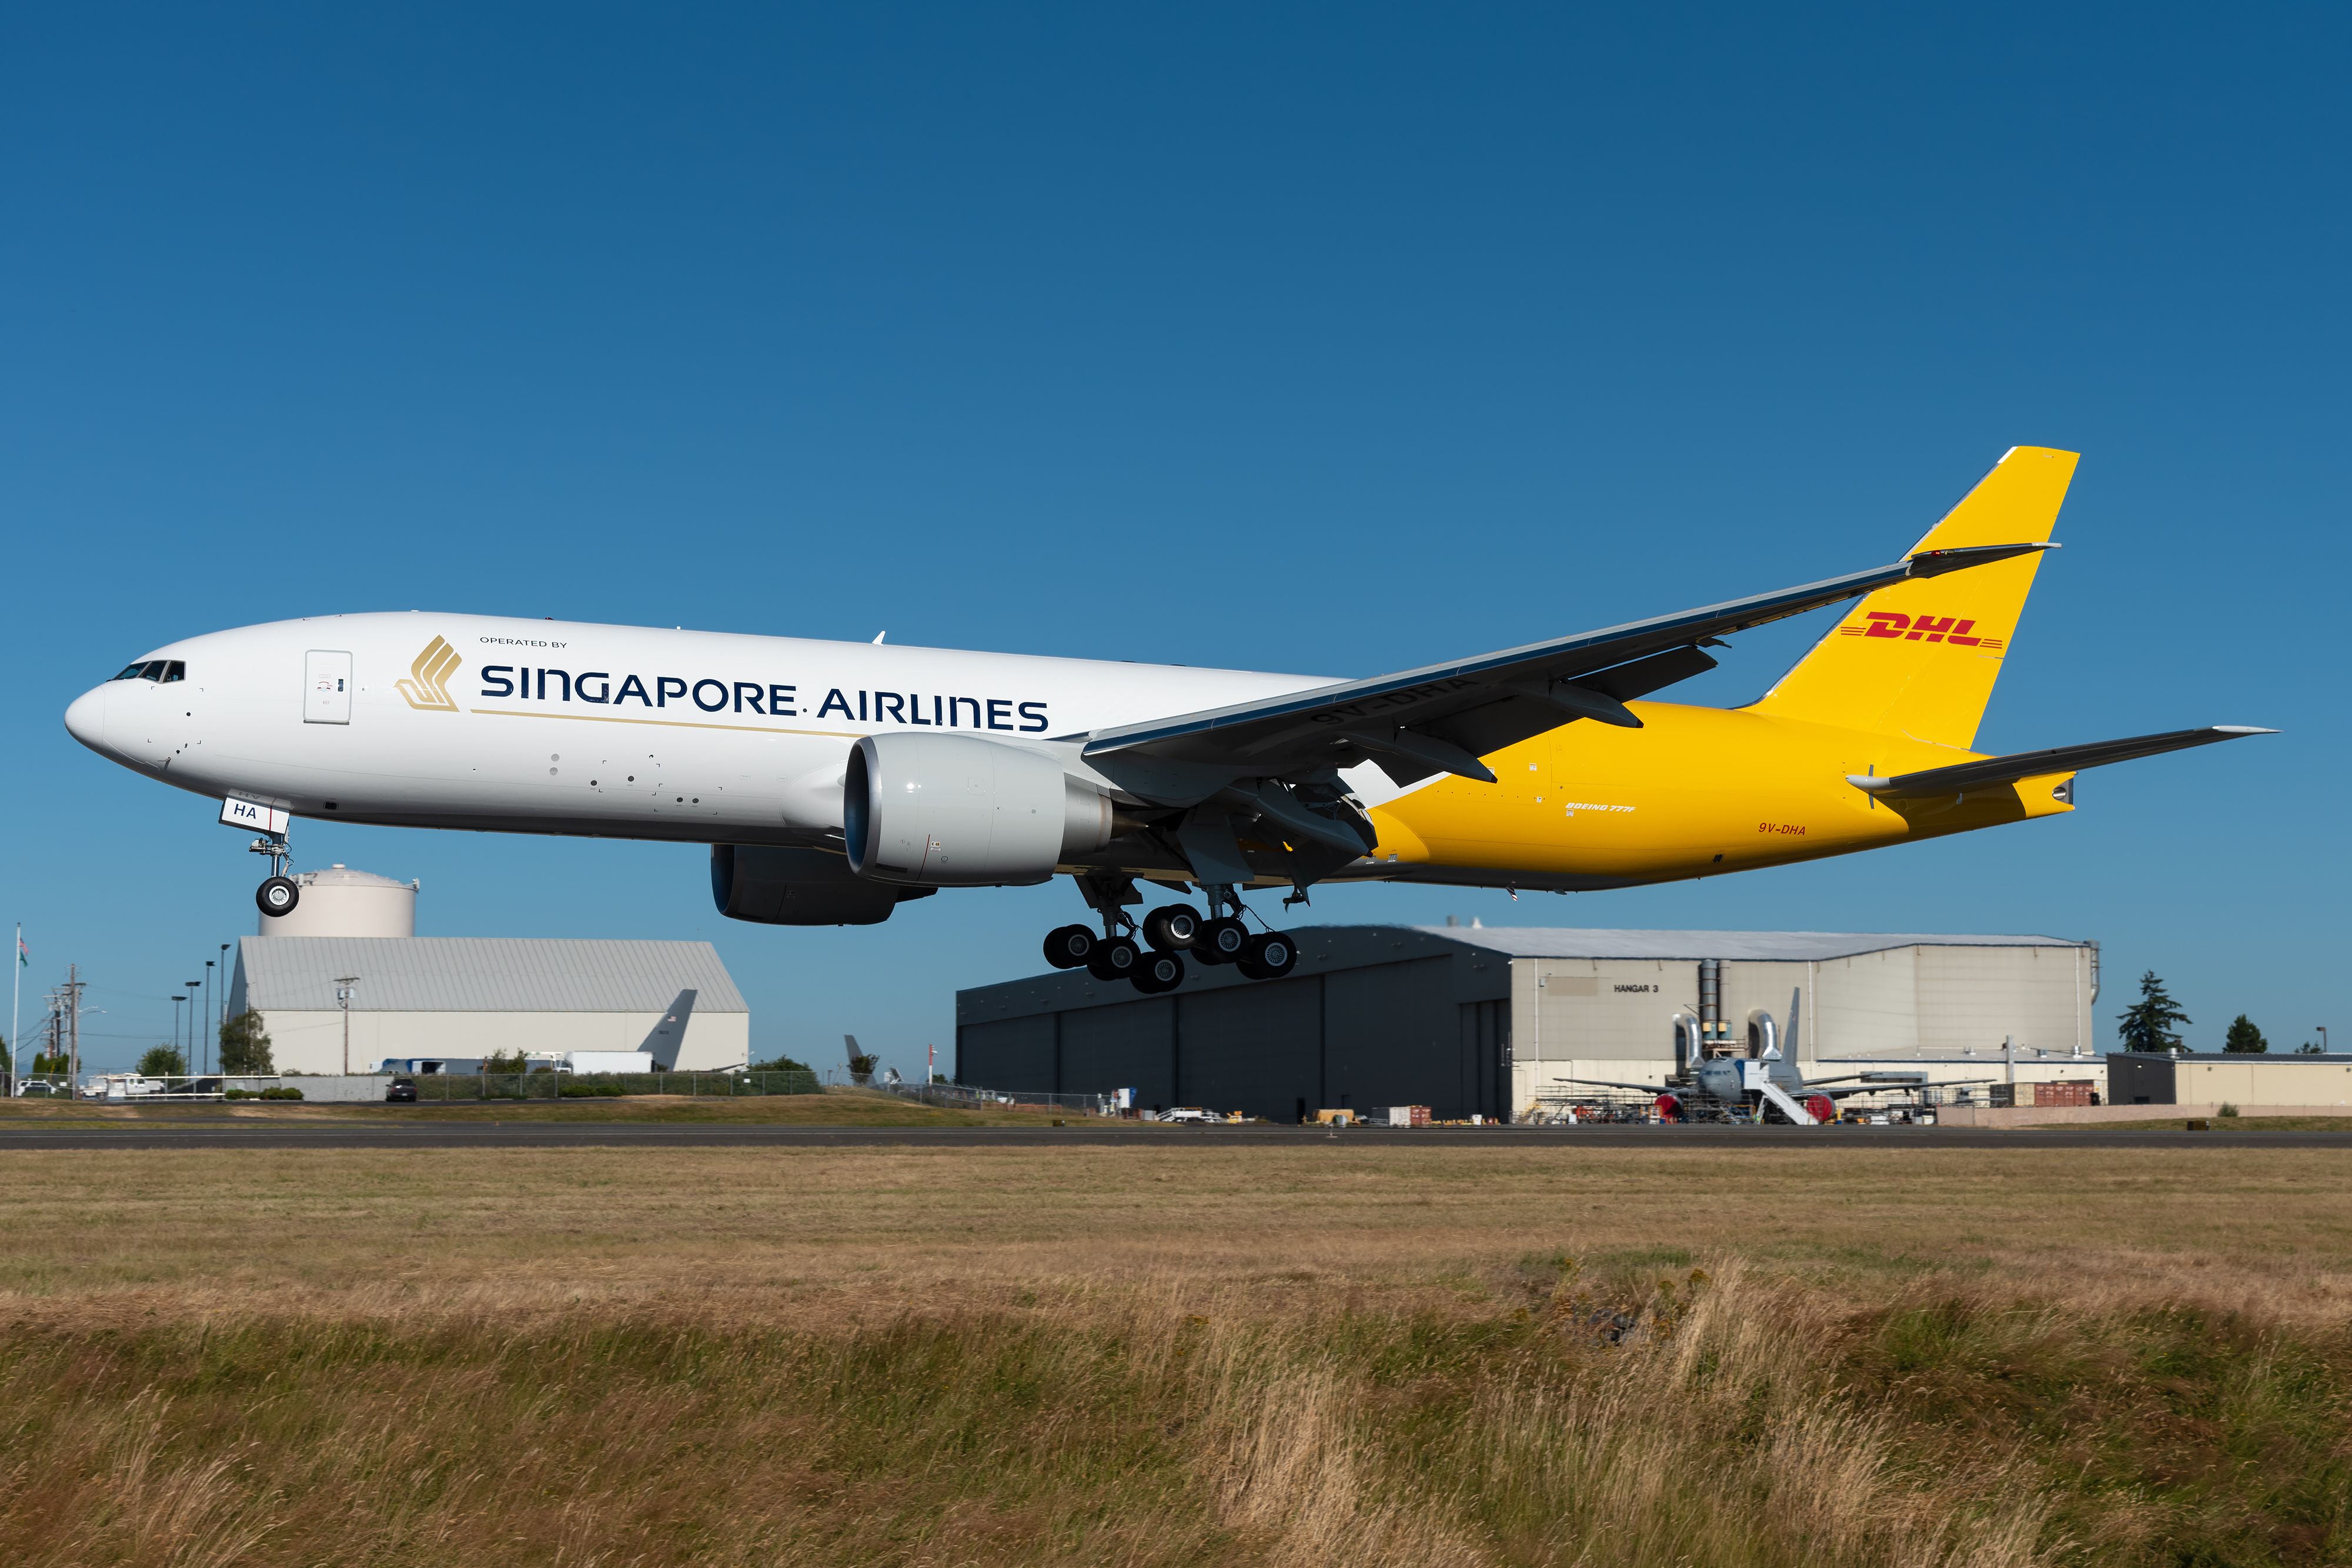 Singapore Airlines DHL common livery Boeing 777 freighter